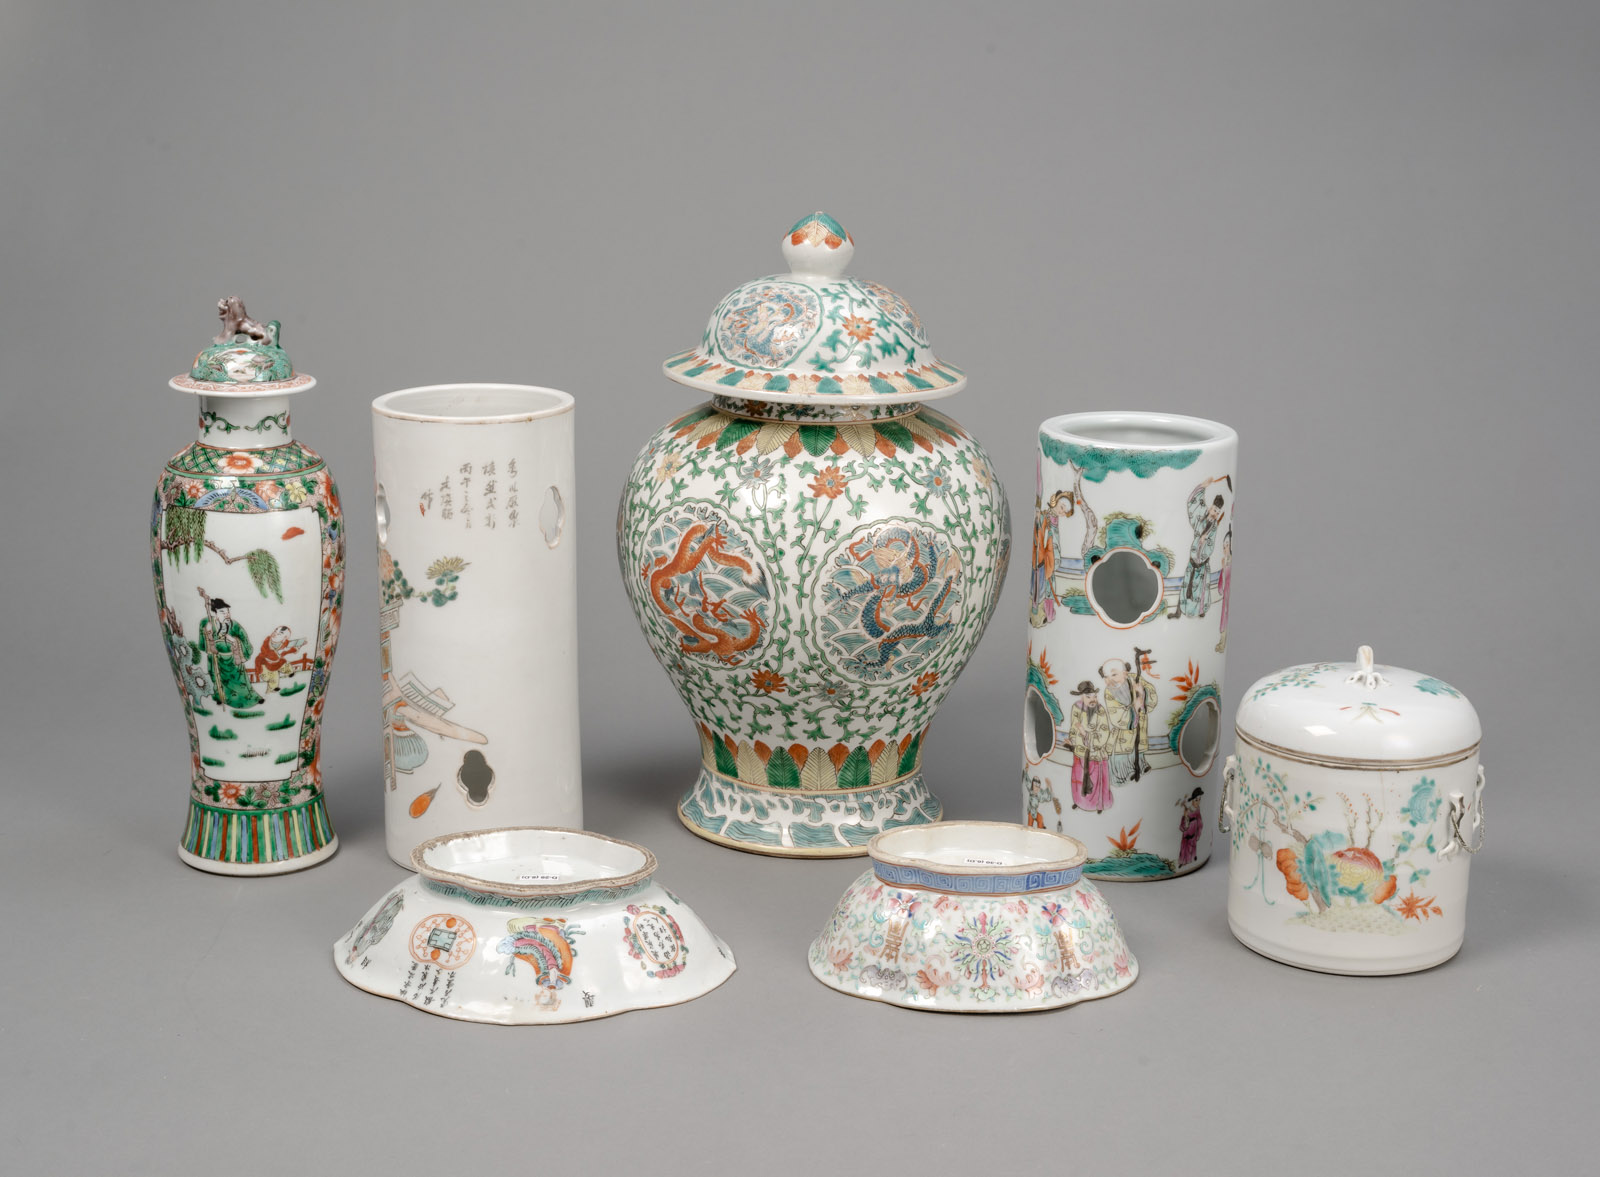 TWO 'FAMILLE ROSE' PORCELAIN HAT STANDS, TWO VASES AND COVERS, A LIDDED BOX, AND TWO STEM TRAYS, E. - Image 2 of 4